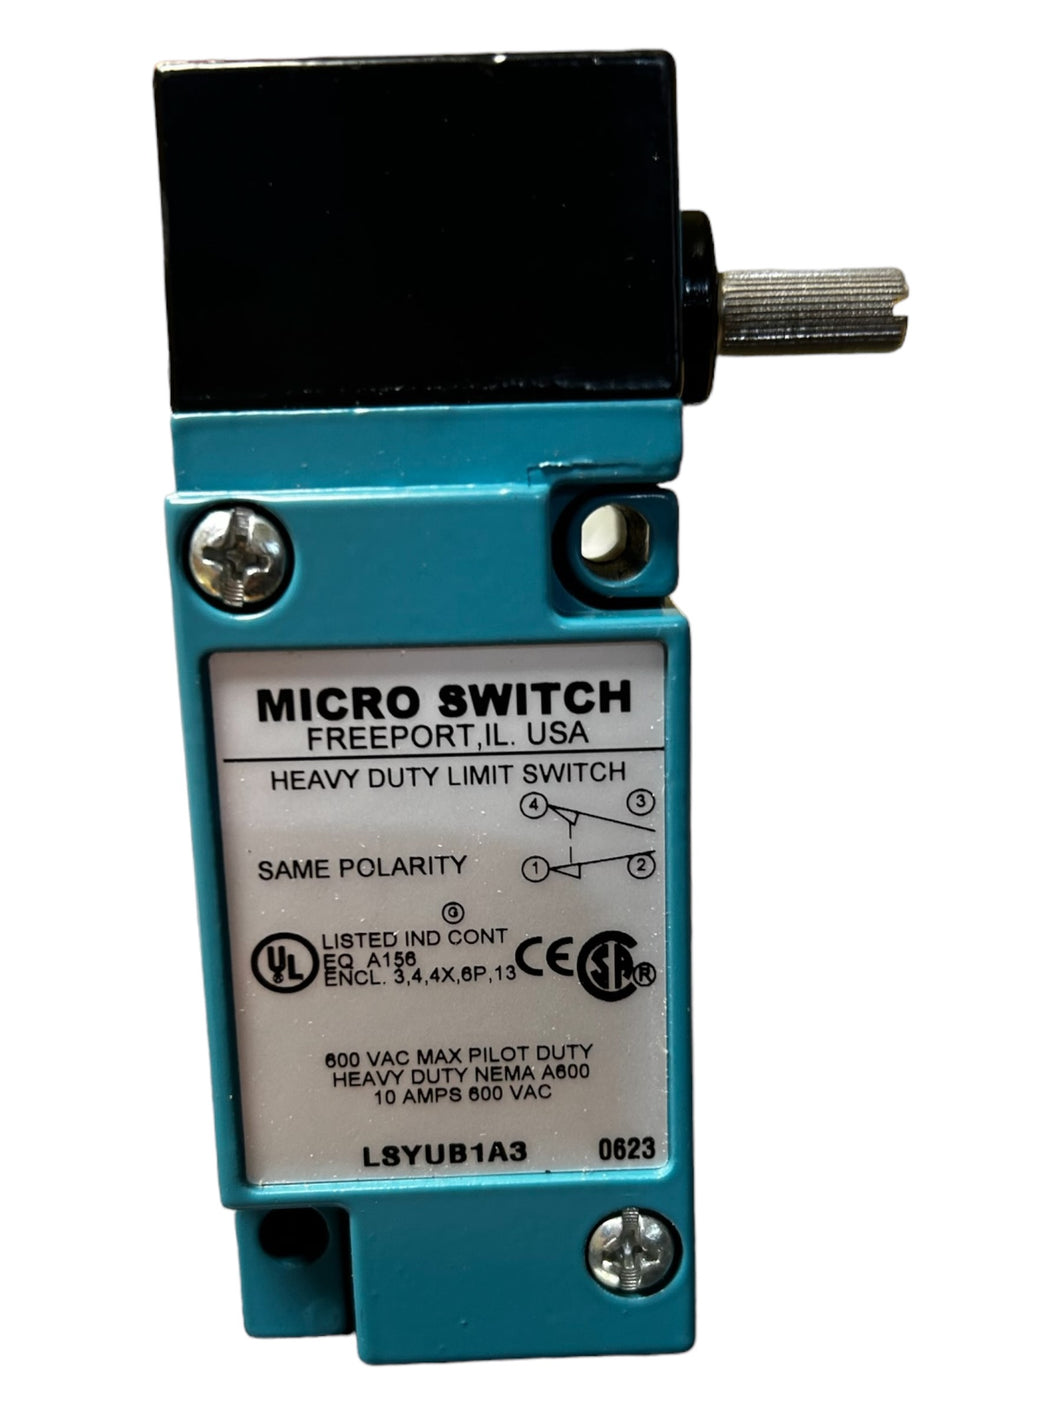 HONEYWELL MICRO SWITCH, LSYUB1A3, Limit Switch, SIDE ROTARY - NEW IN BOX - FreemanLiquidators - [product_description]